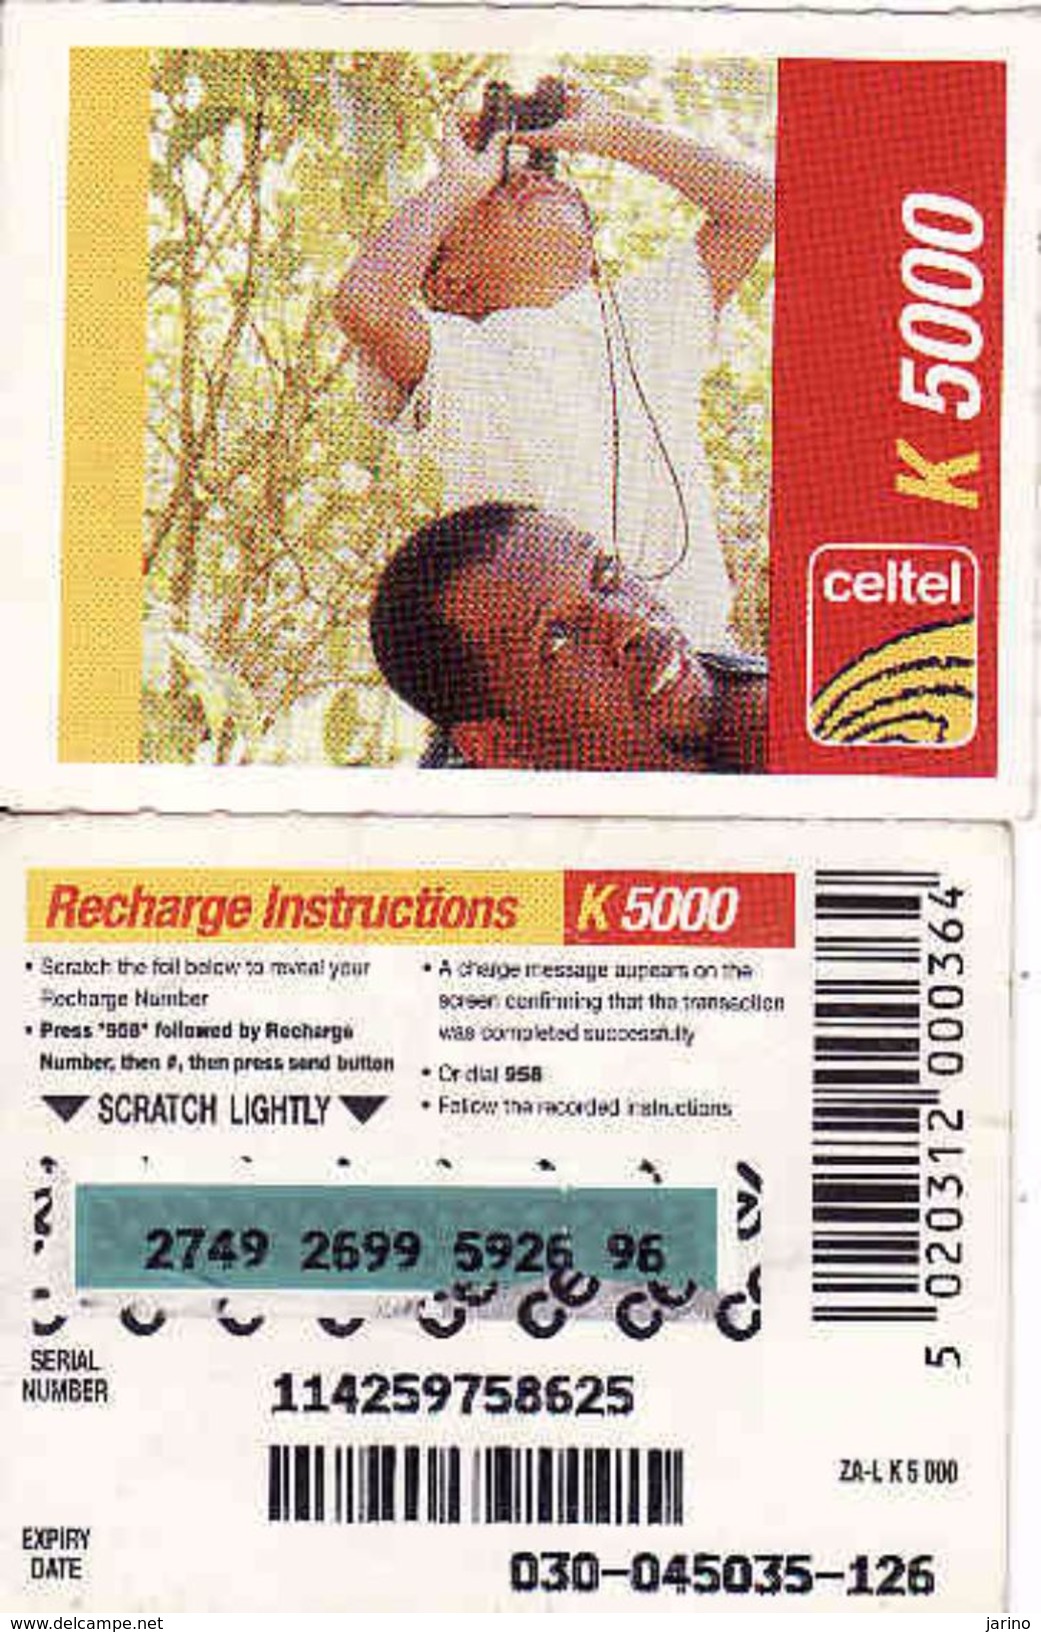 Zambia Celtel K 5 000 Recharge Phonecard, Used - Sambia